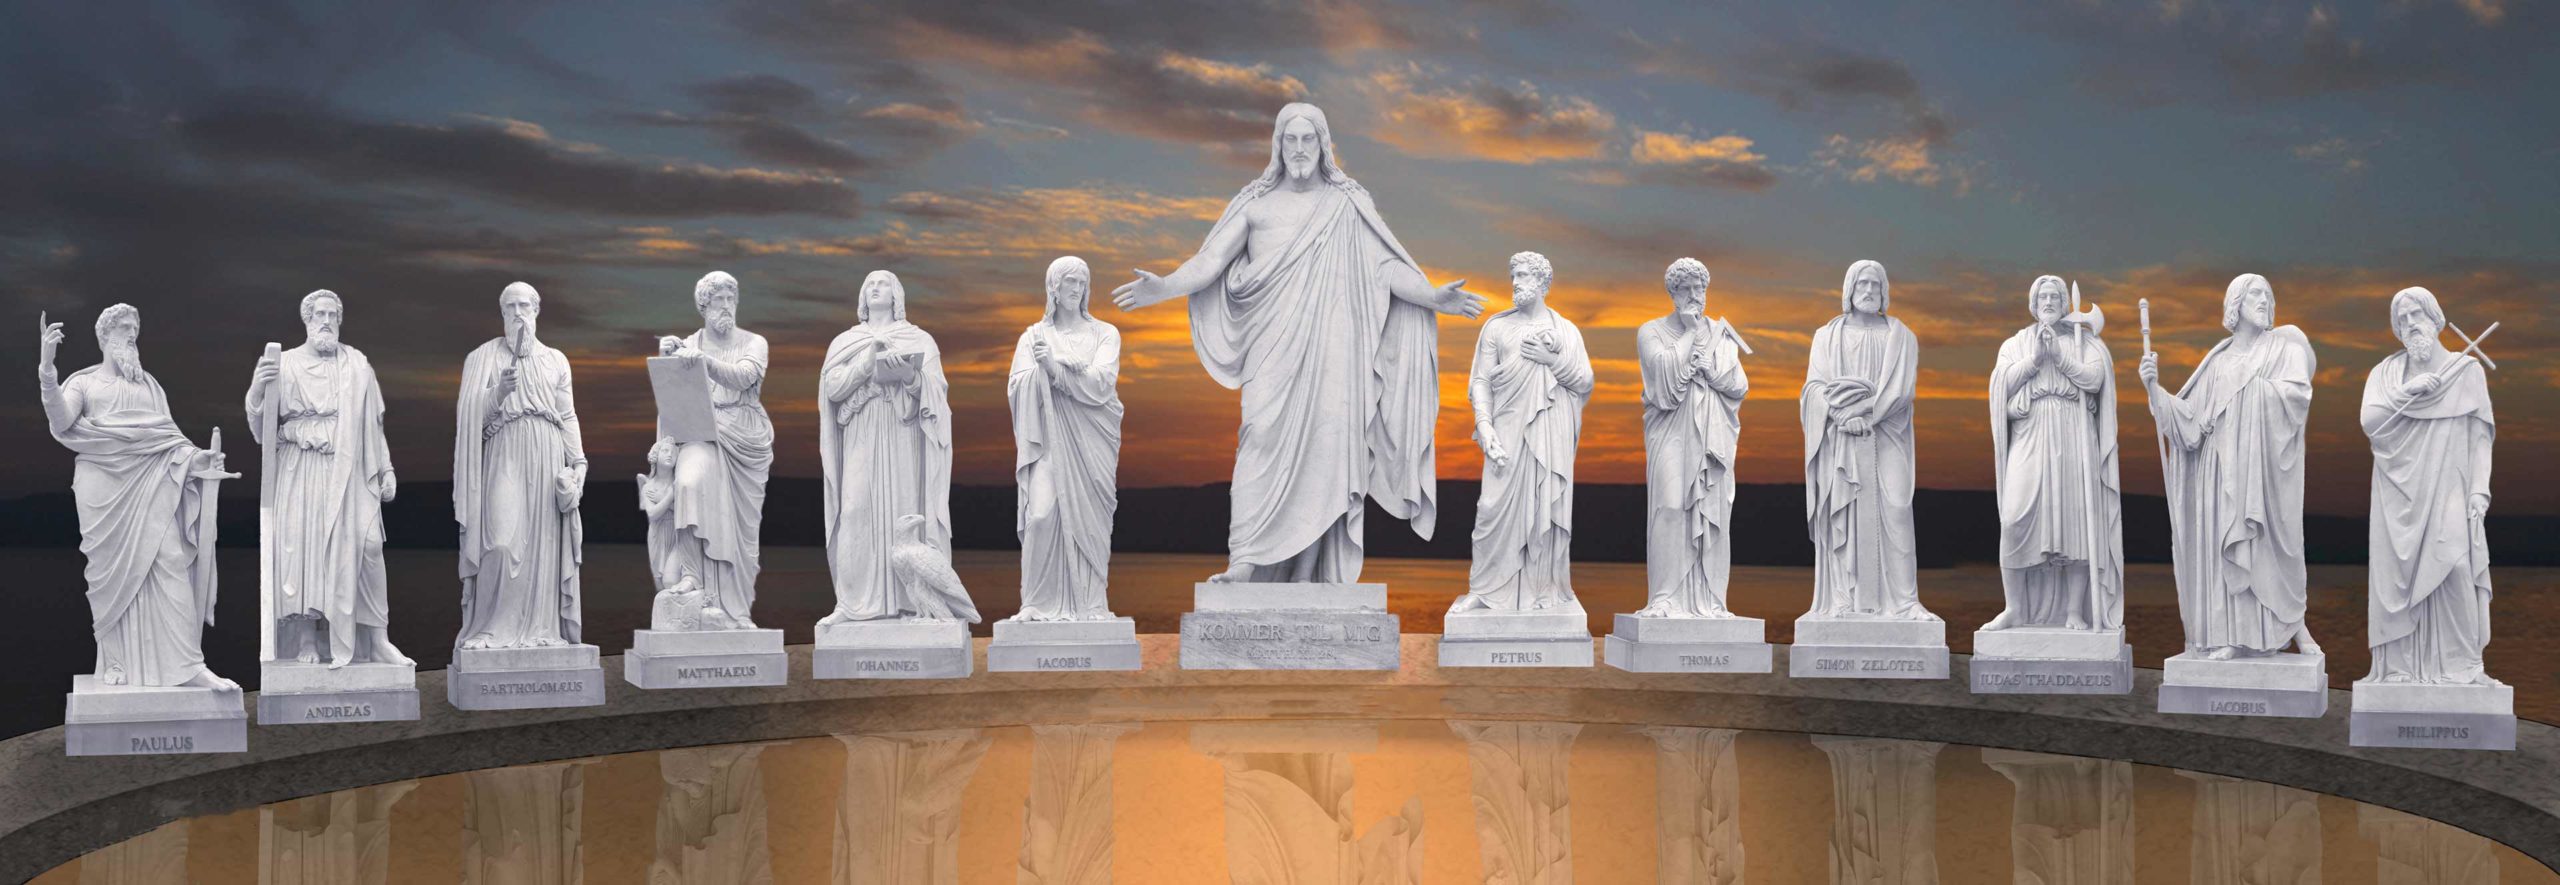 Statue Of Jesus for decor - marble materials the Apostles Of Jesus statue